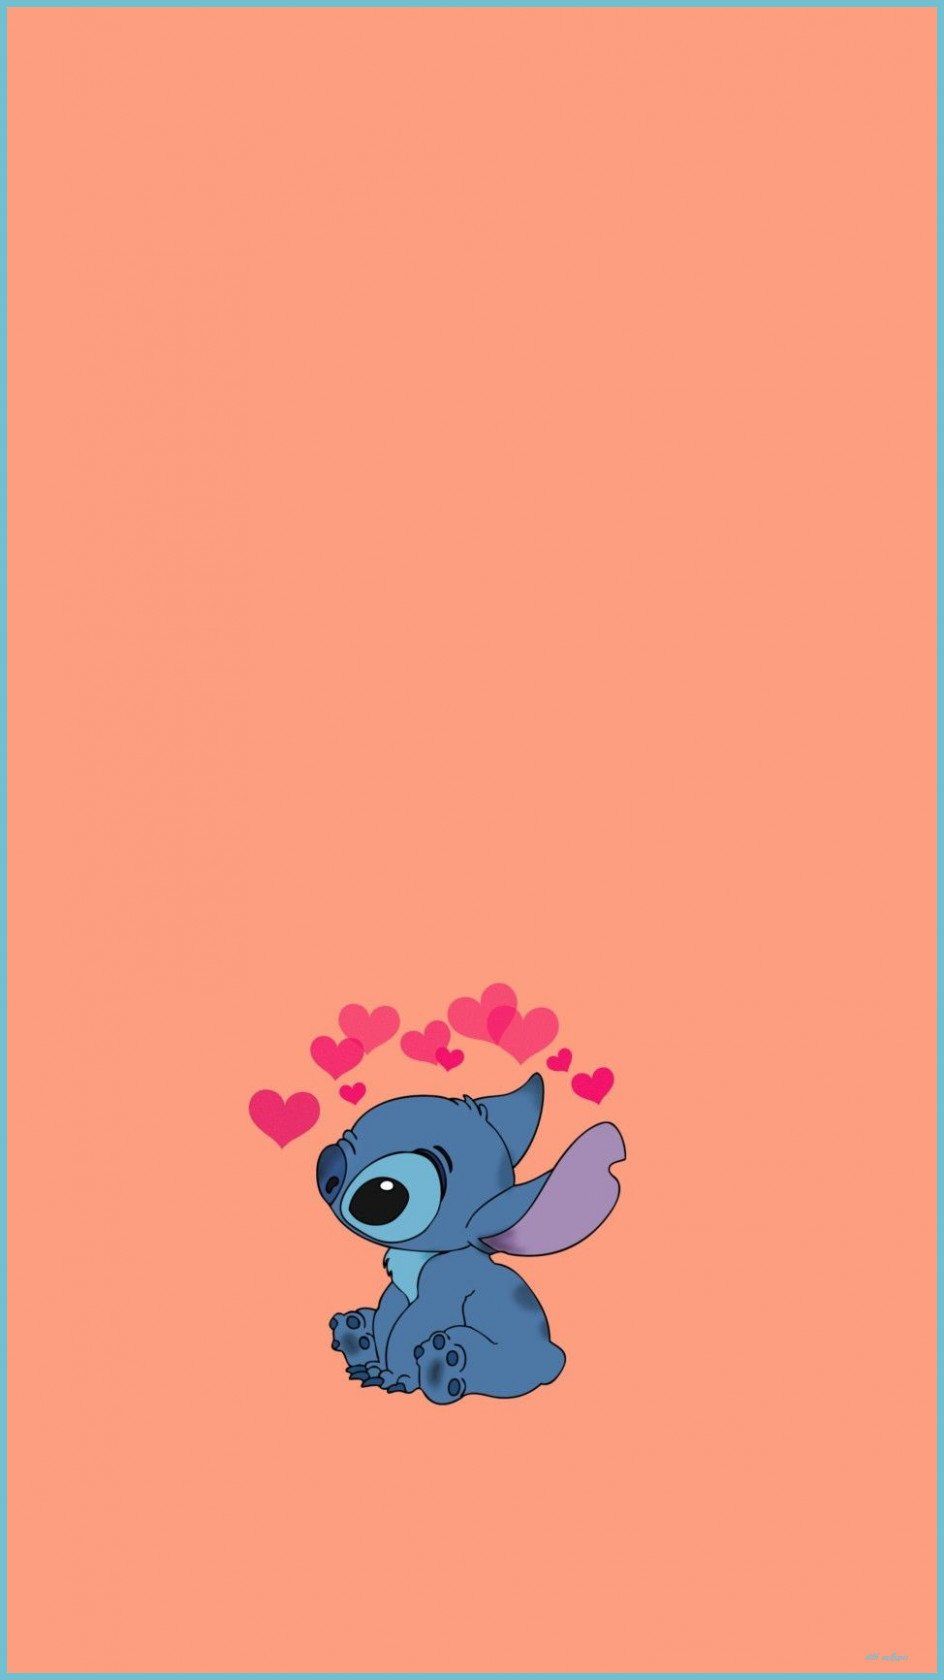 Aesthetic stitch Wallpaper Download